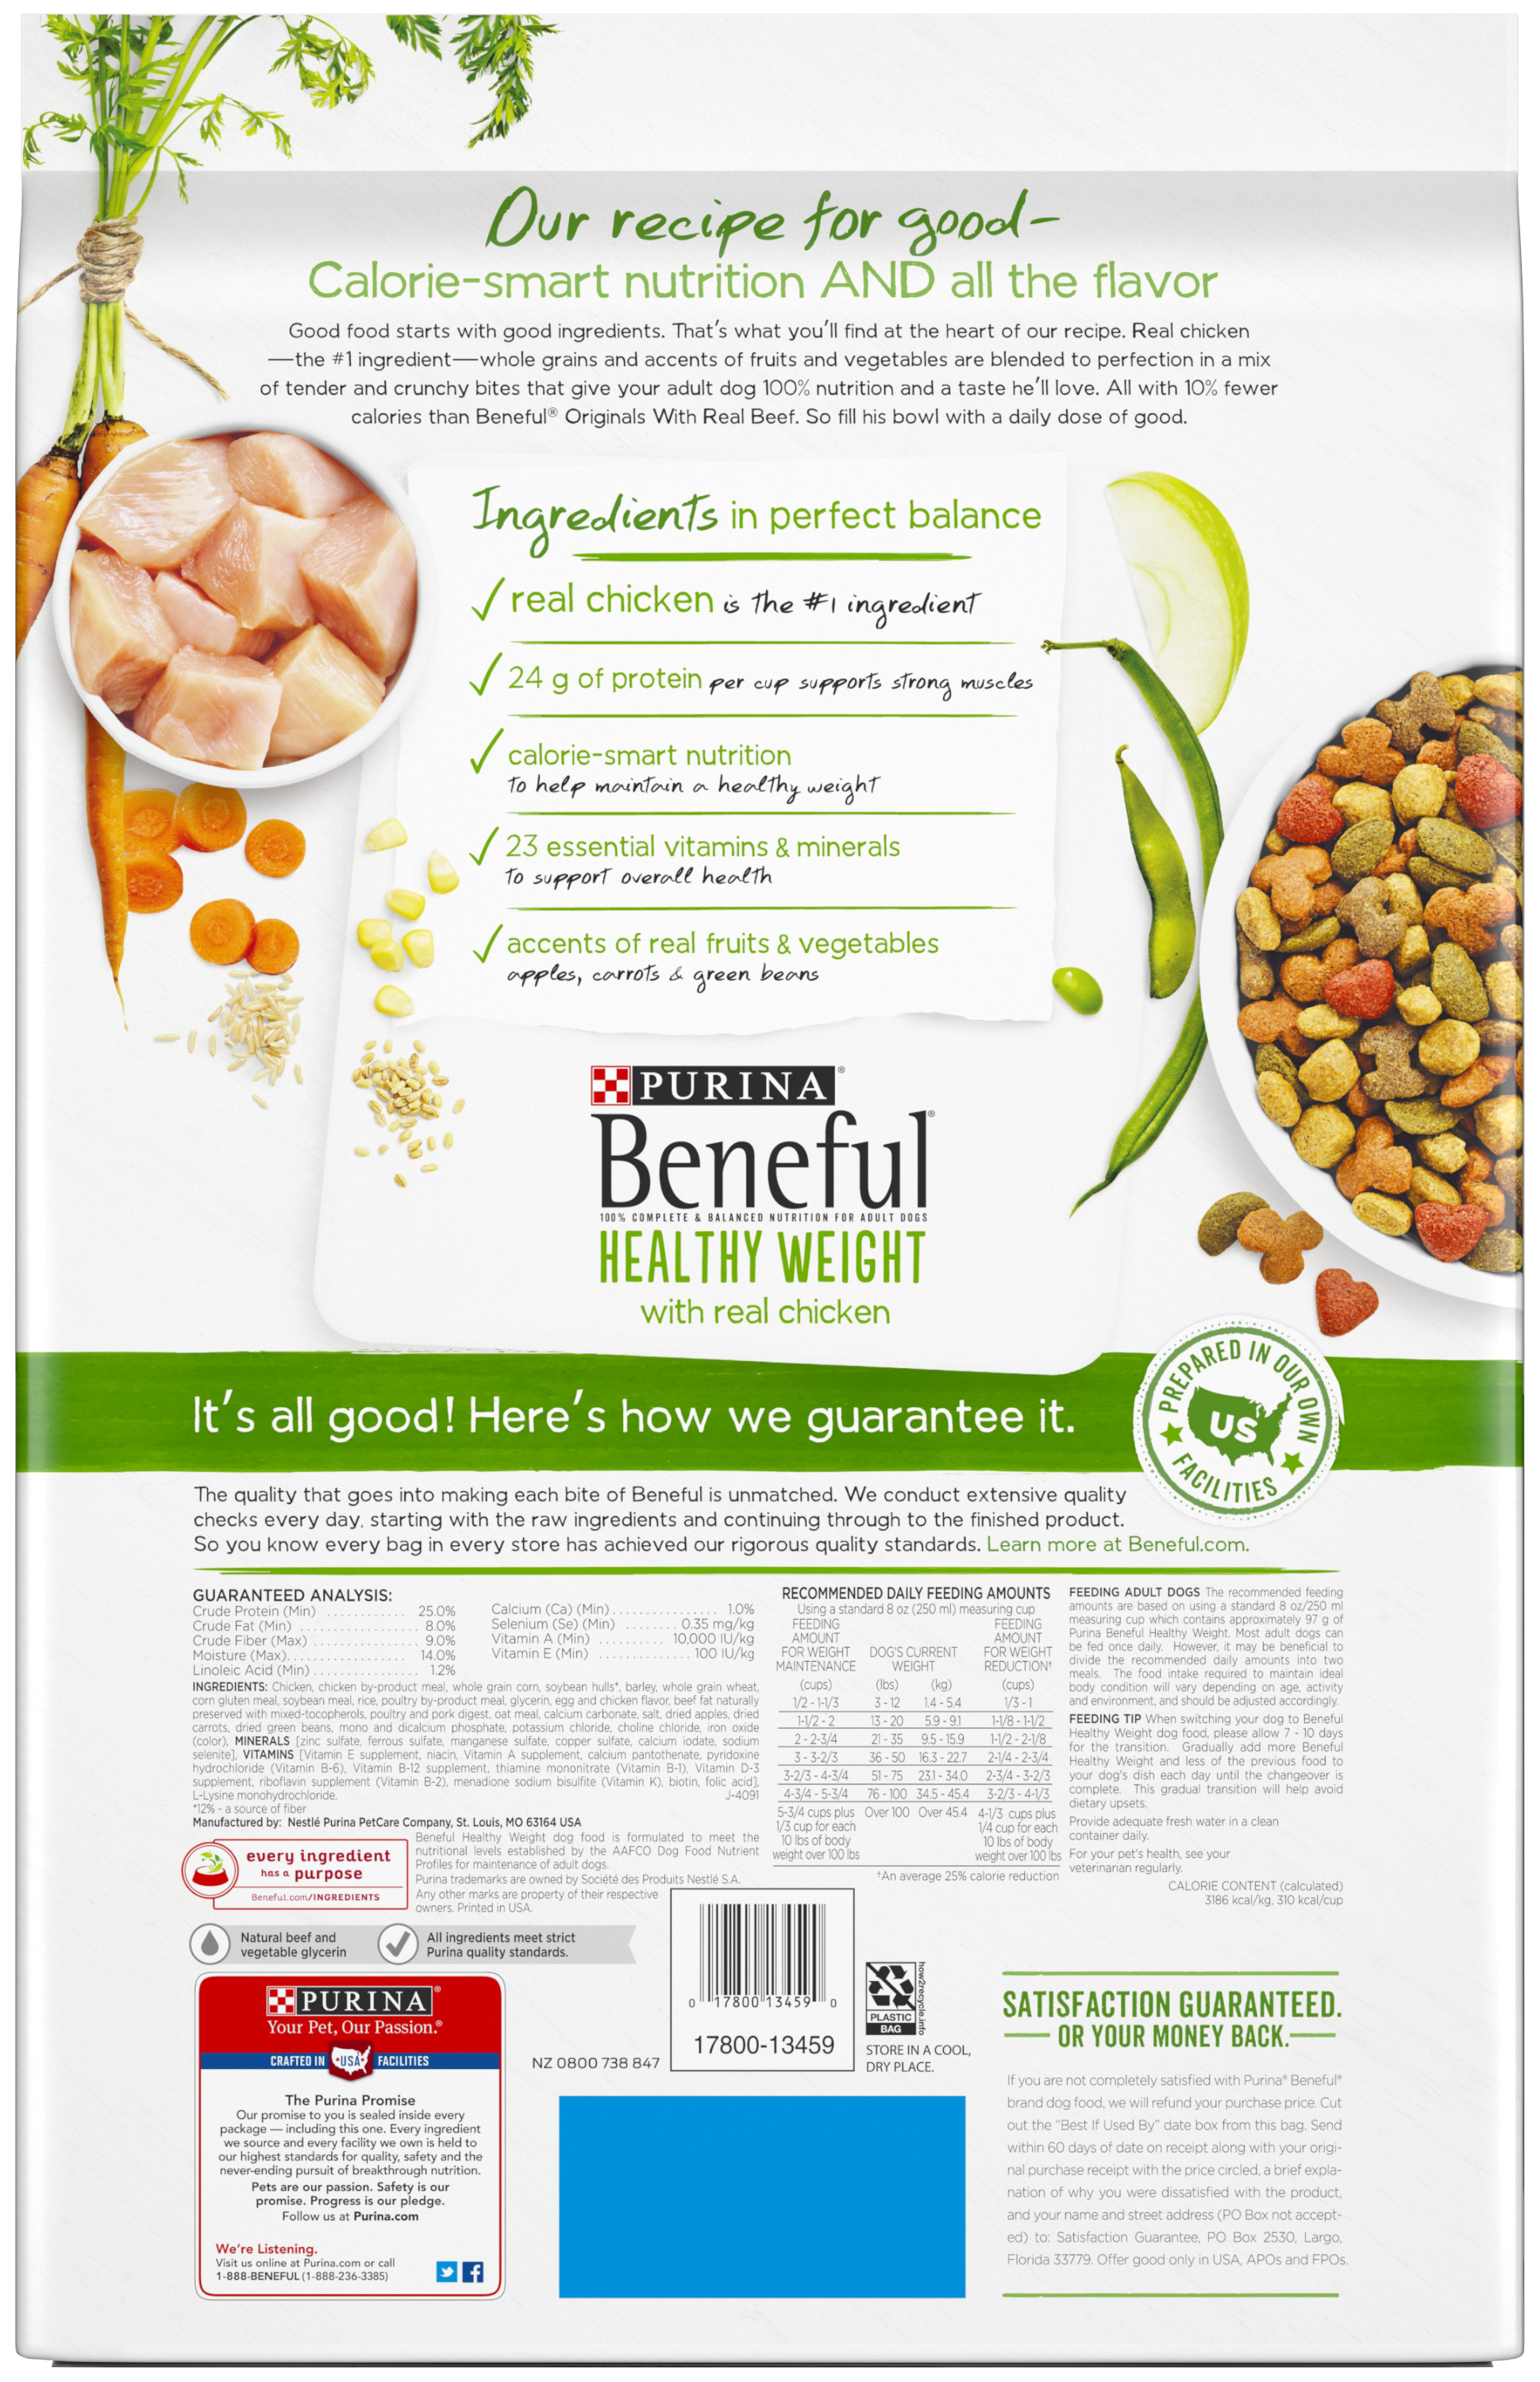 Purina Beneful Healthy Weight Dry Dog Food, Healthy Weight With Farm-Raised Chicken, 15.5 lb. Bag - image 4 of 15